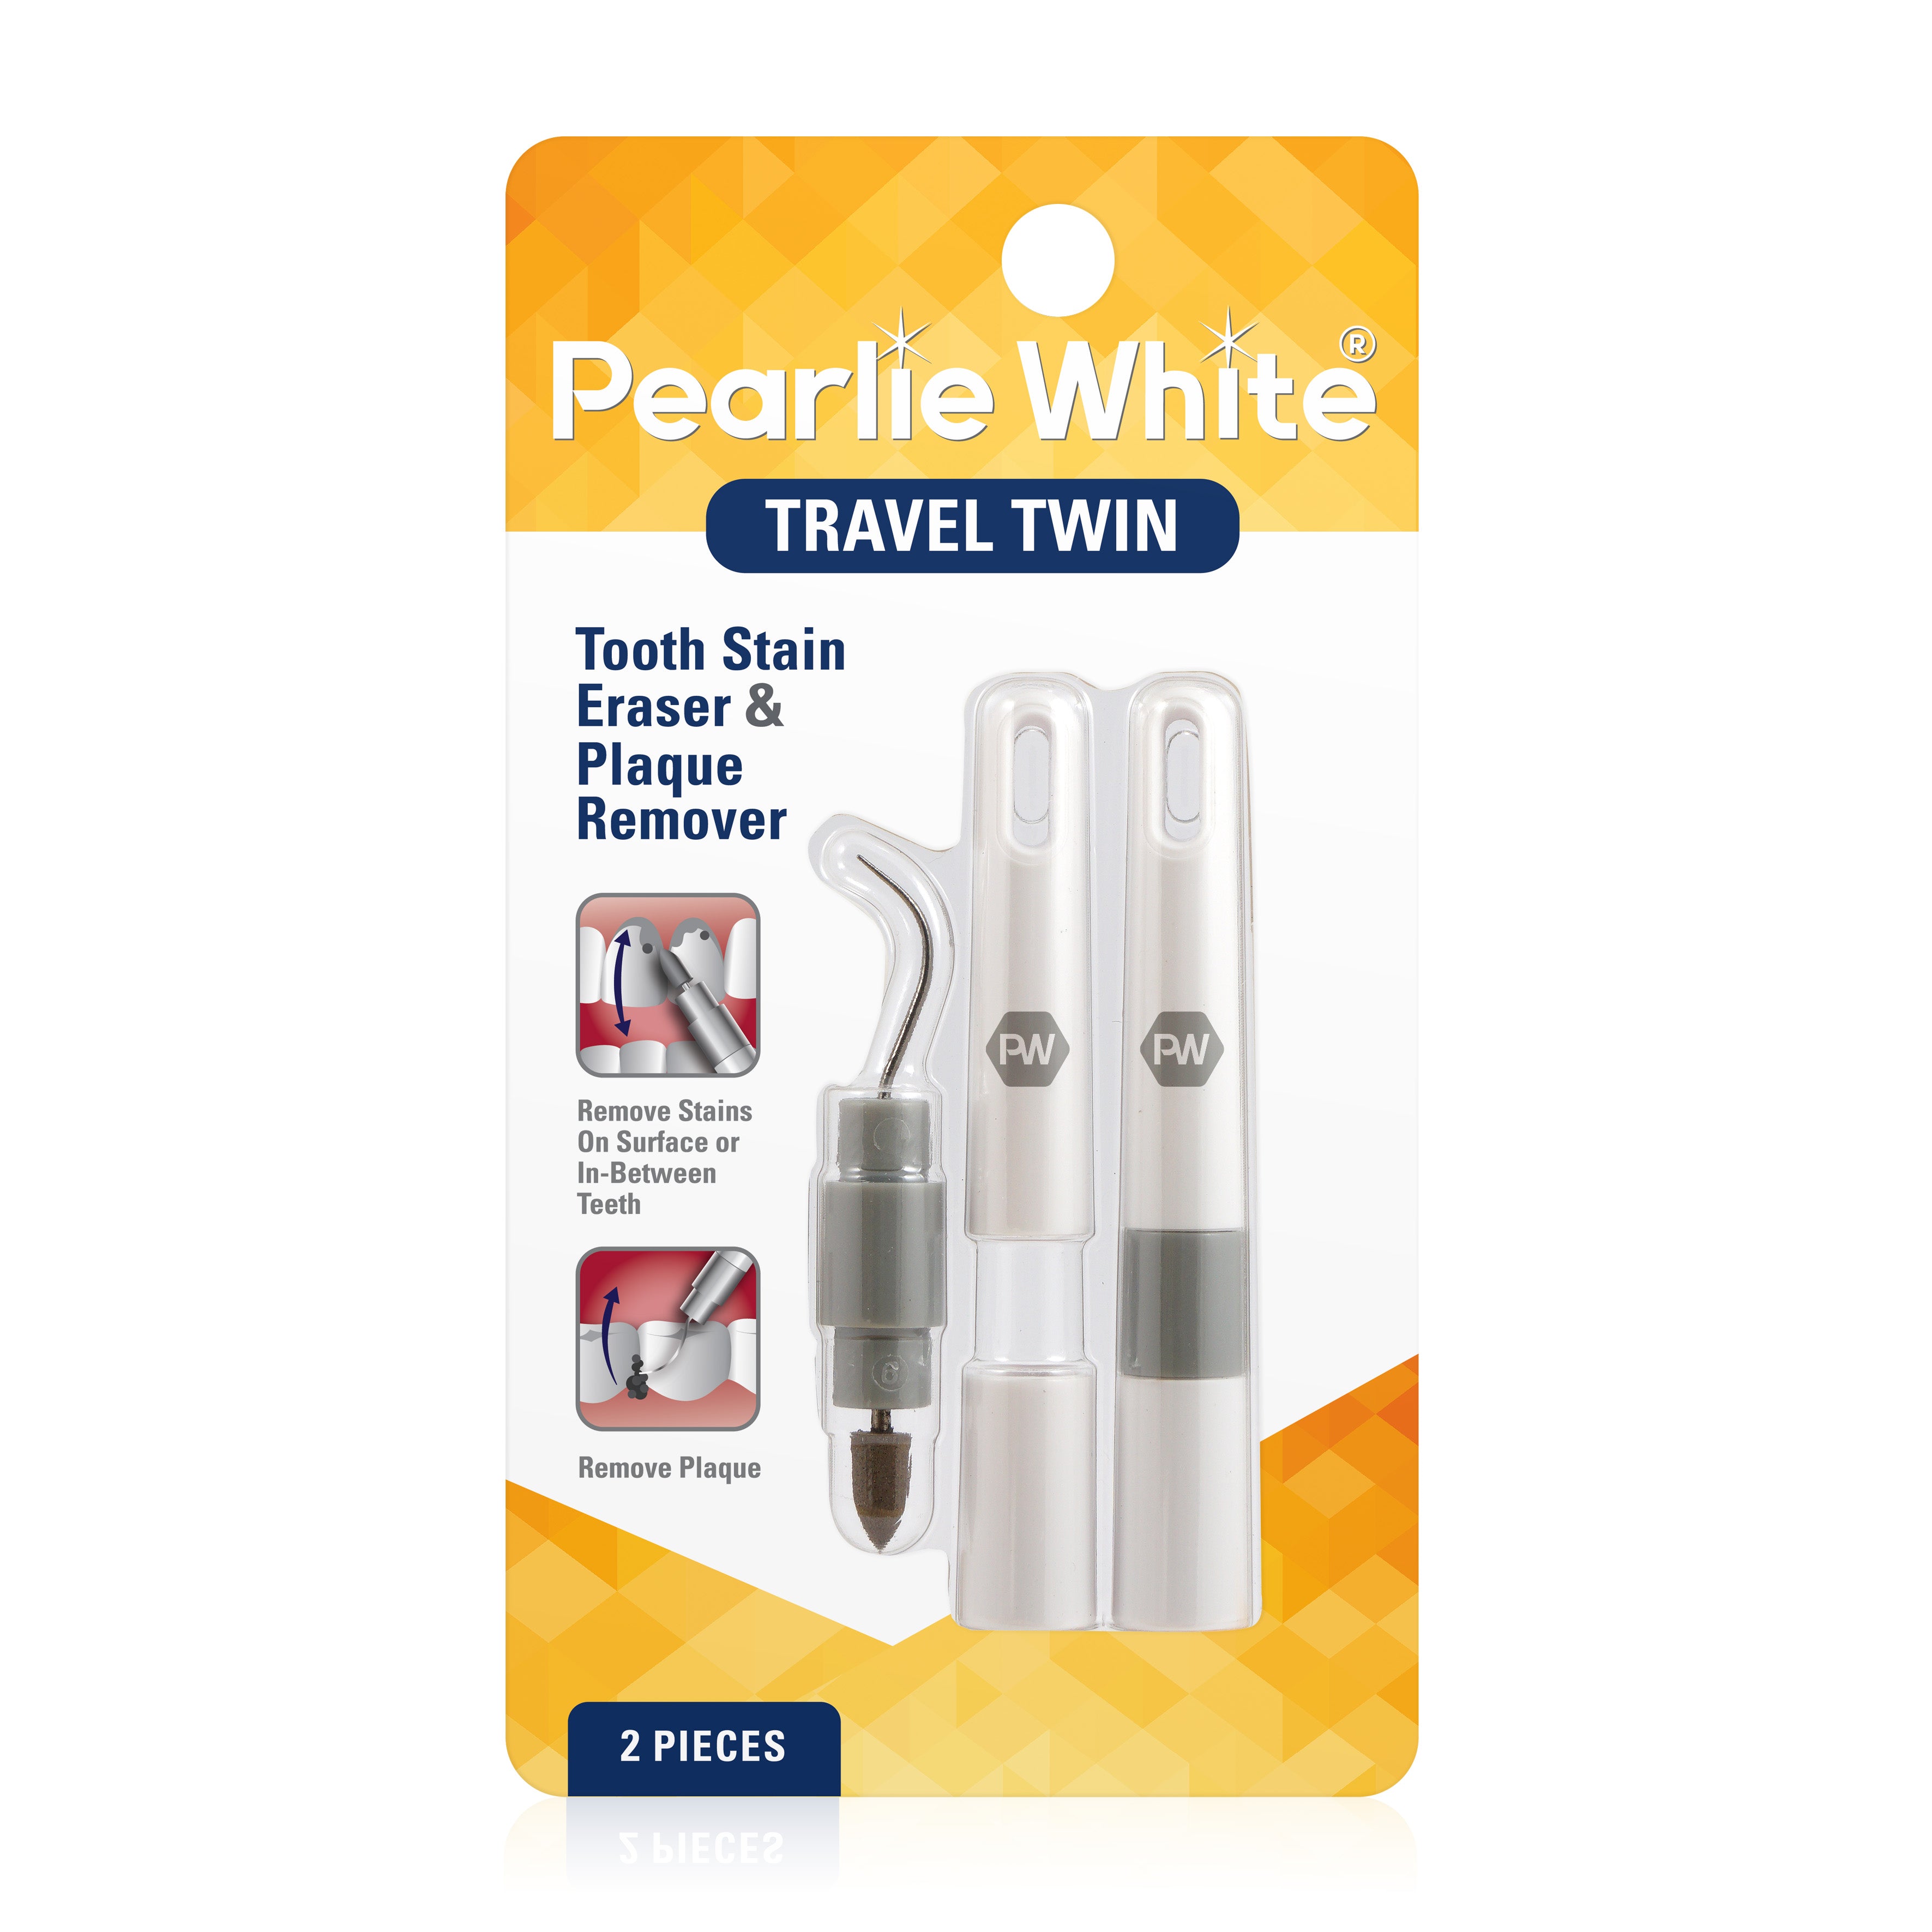 Travel Twin Tooth Stain Eraser & Plaque Remover